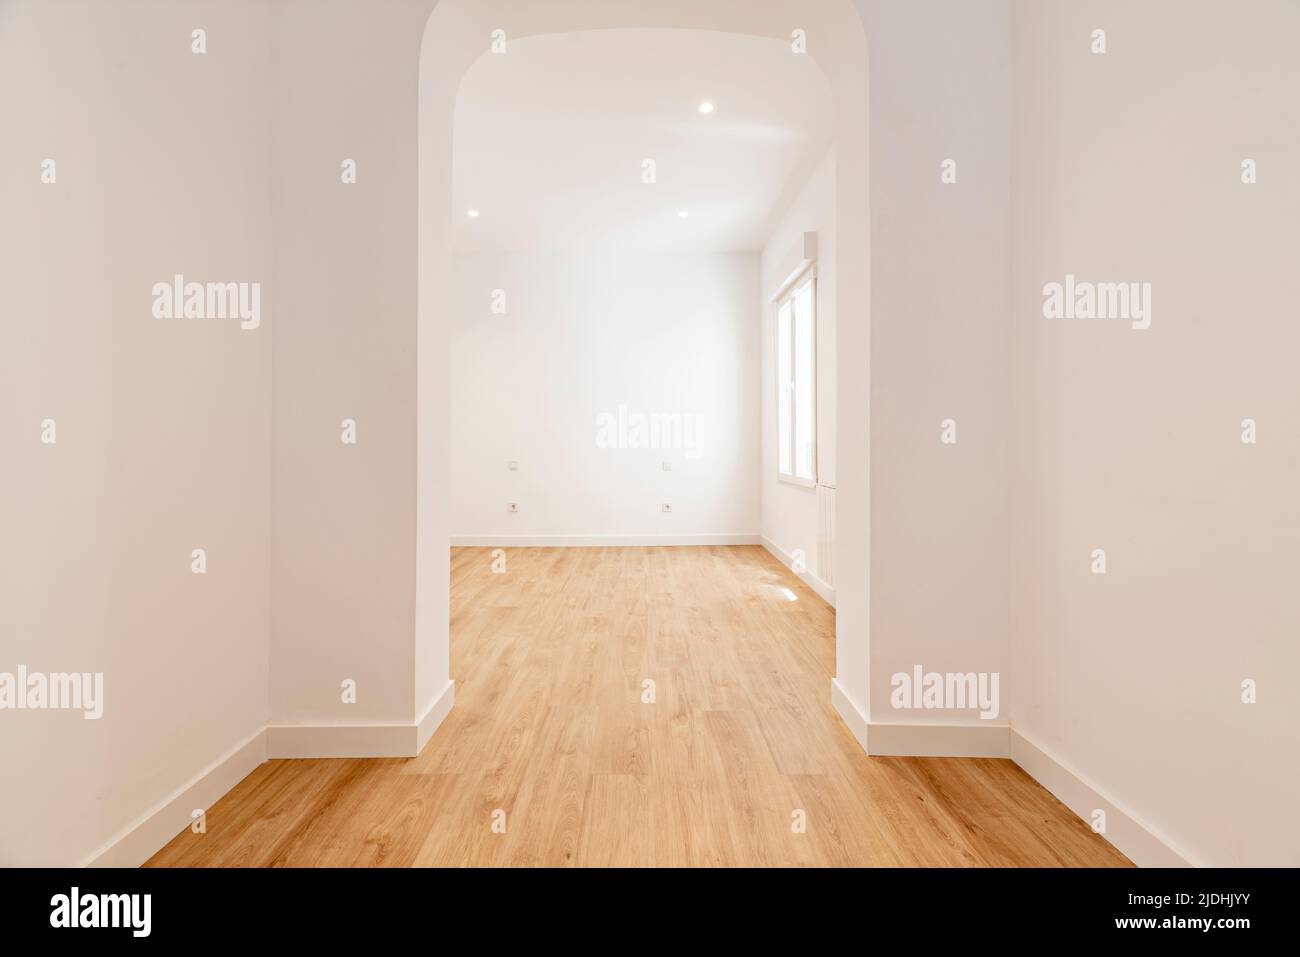 Empty room with plain white painted walls, plain aluminum windows and basket-handle arch separating the rooms with light oak wood floors Stock Photo